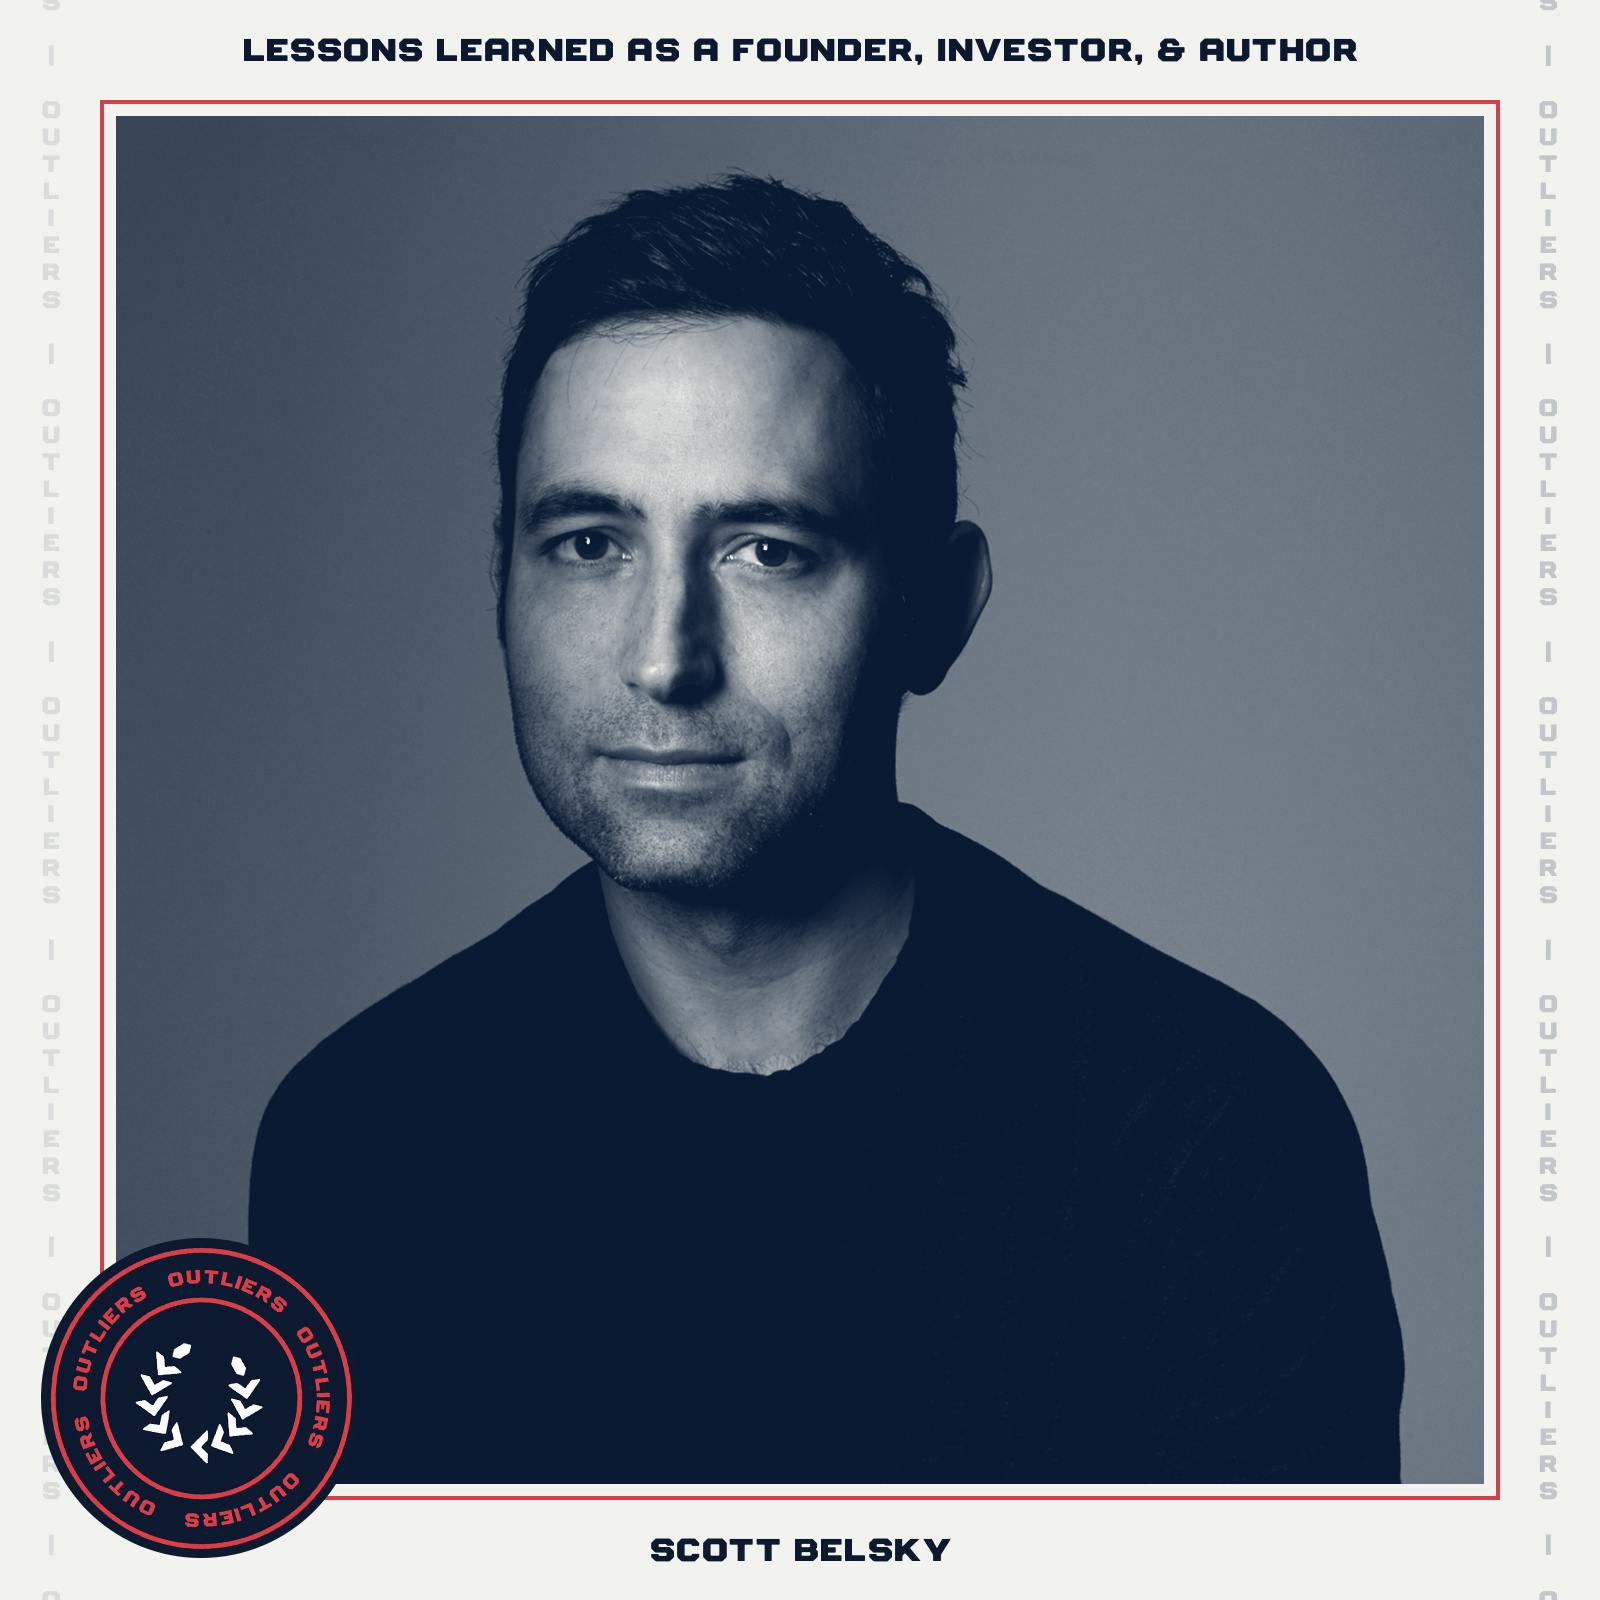 #30 The Messy Middle: Lessons Learned as a Founder, Investor, and Bestselling Author | Scott Belsky, Author & Venture Capitalist Image